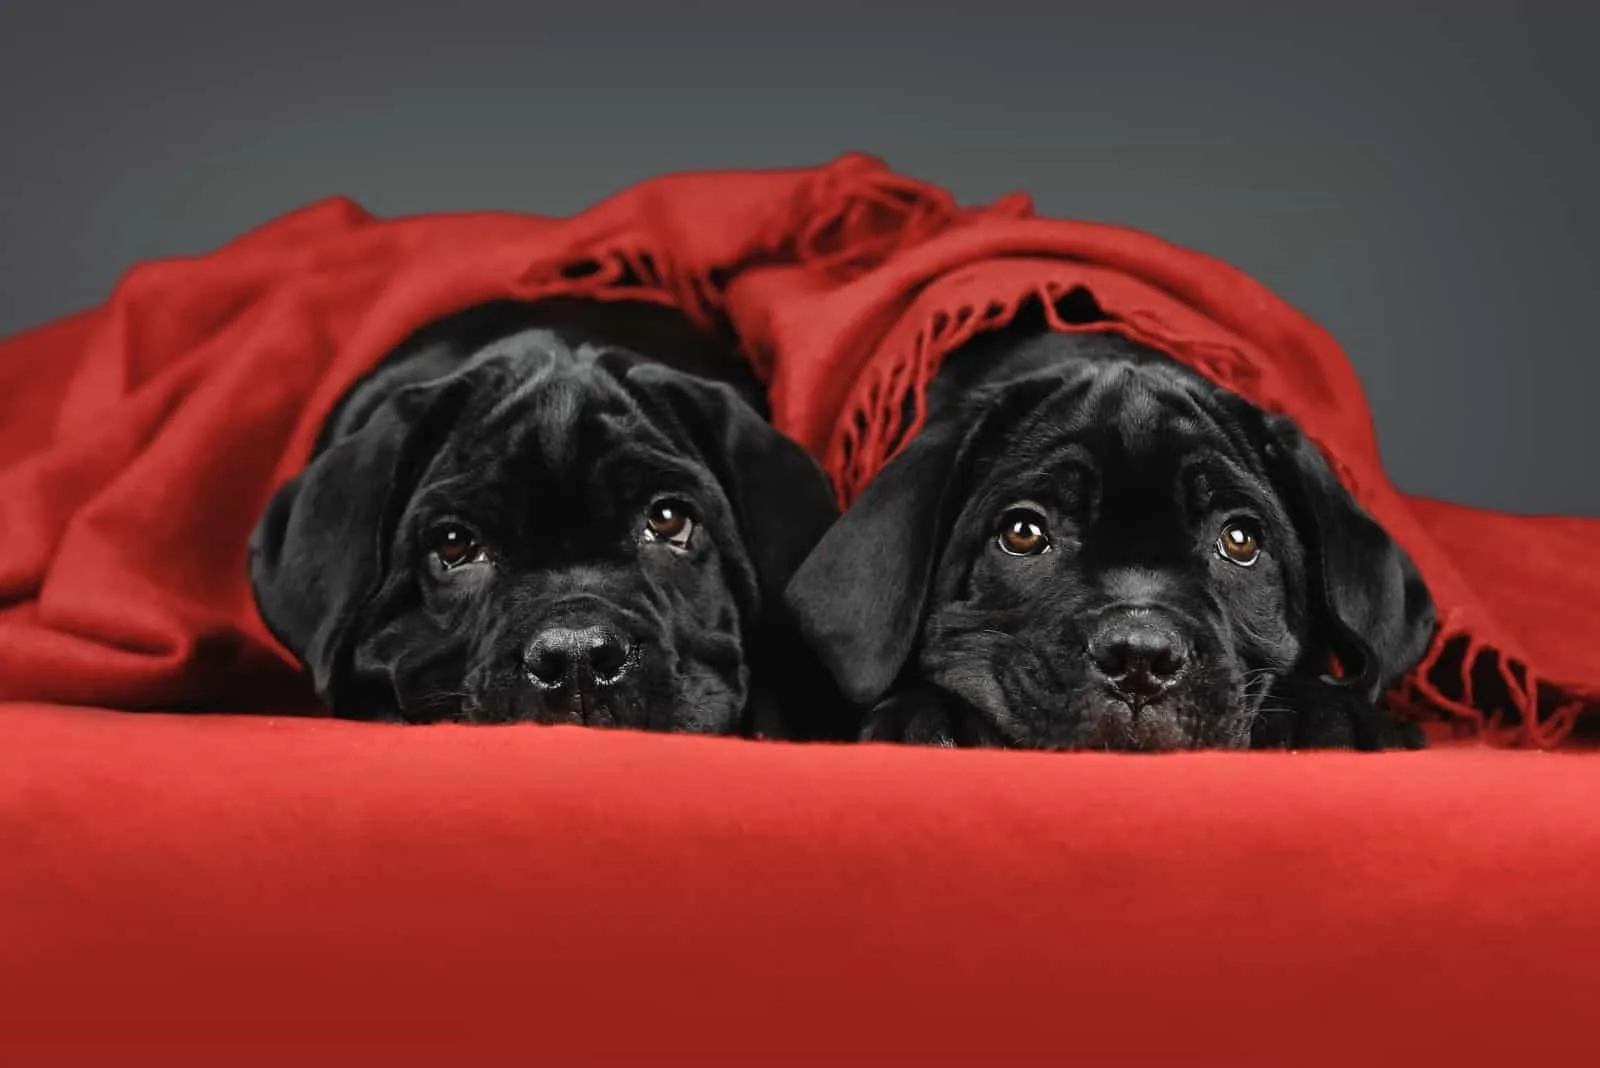 two cute corso puppies under a red blanket with gray background